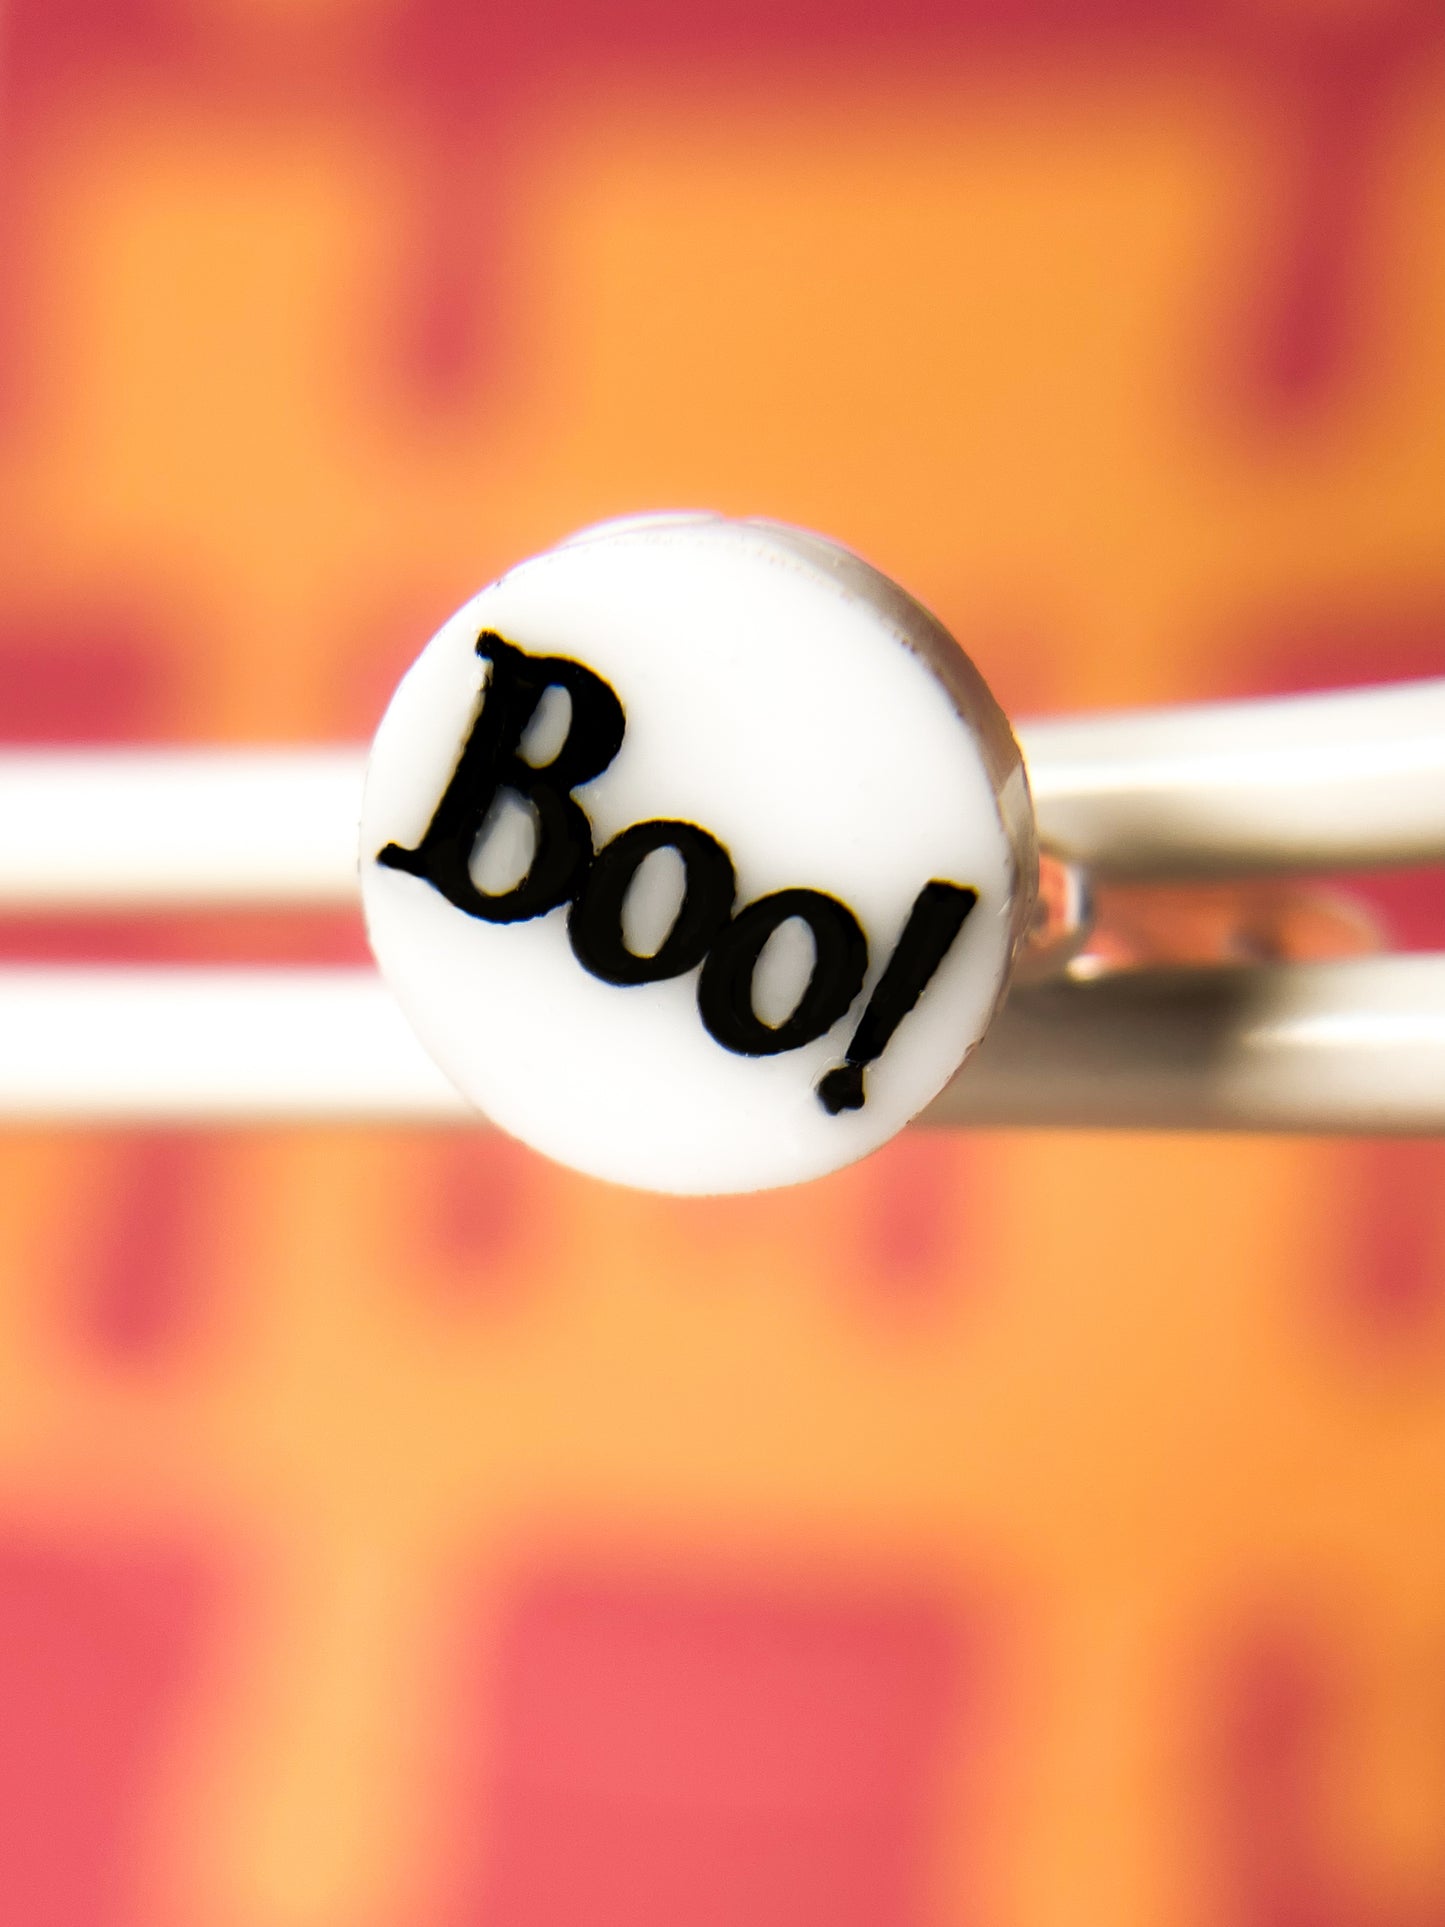 Boo! ear cuff (Left and right sold separately)